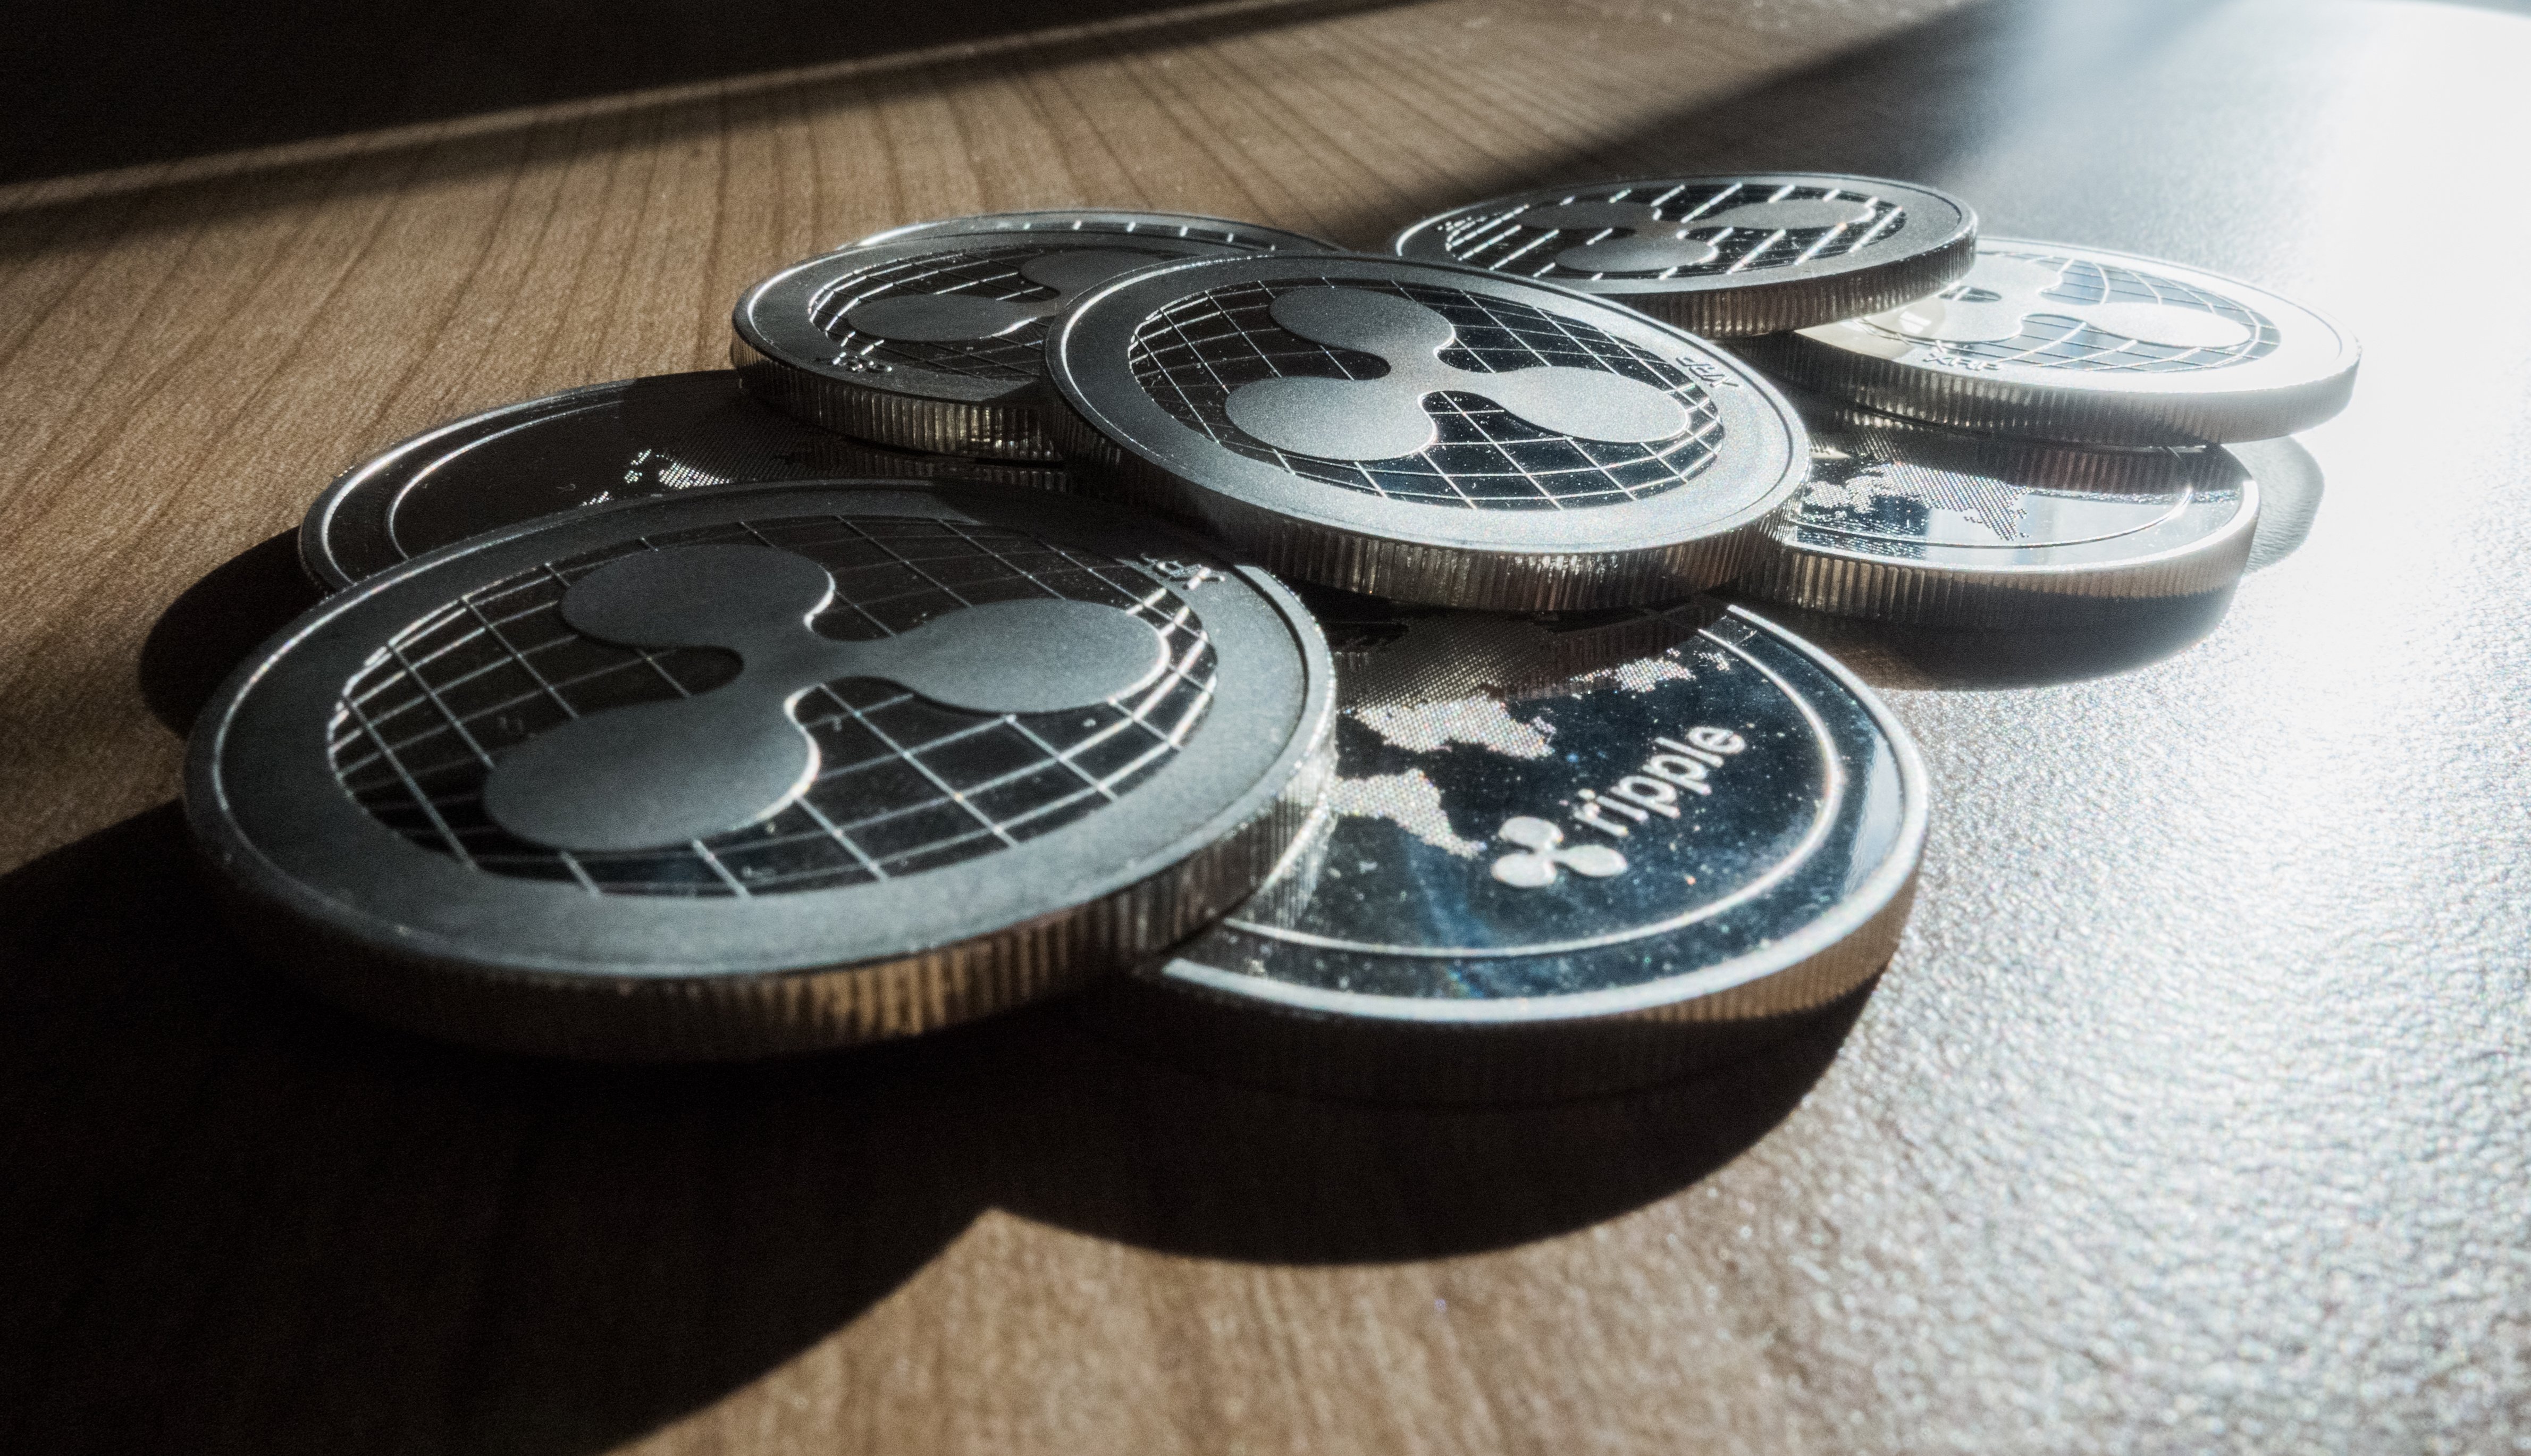 127.3 Million XRP Shifted by Exchanges, While XRP Address Activity Goes Way Up